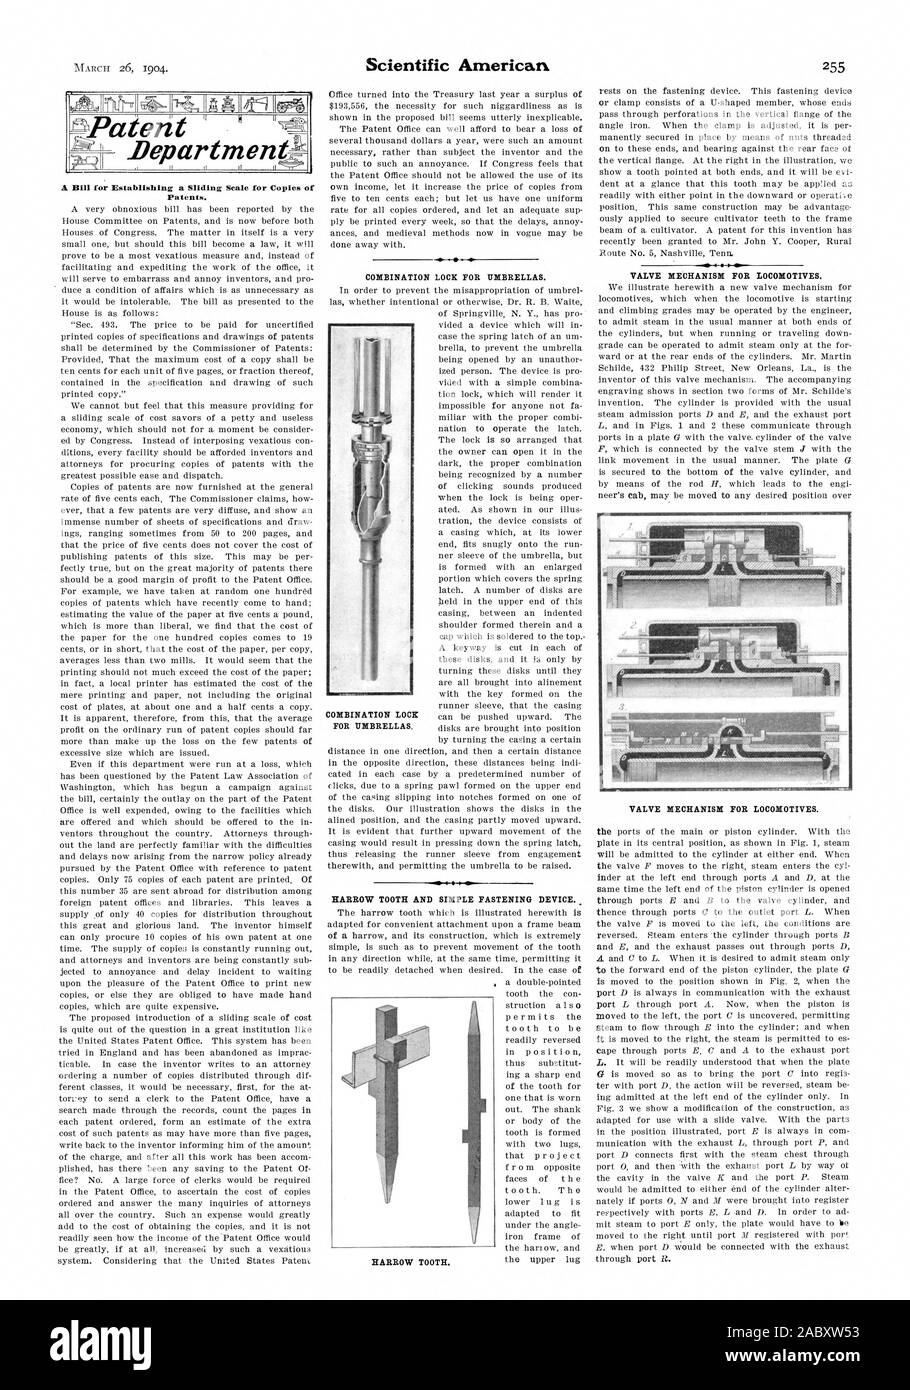 Patent A Bill for Establishing a Sliding Scale for Copies of Patents. COMBINATION LOCK FOR UMBRELLAS. HARROW TOOTH AND SIMPLE FASTENING DEVICE ID  VALVE BIEUHANISII FOR LOCOMOTIVES., scientific american, 1904-03-26 Stock Photo